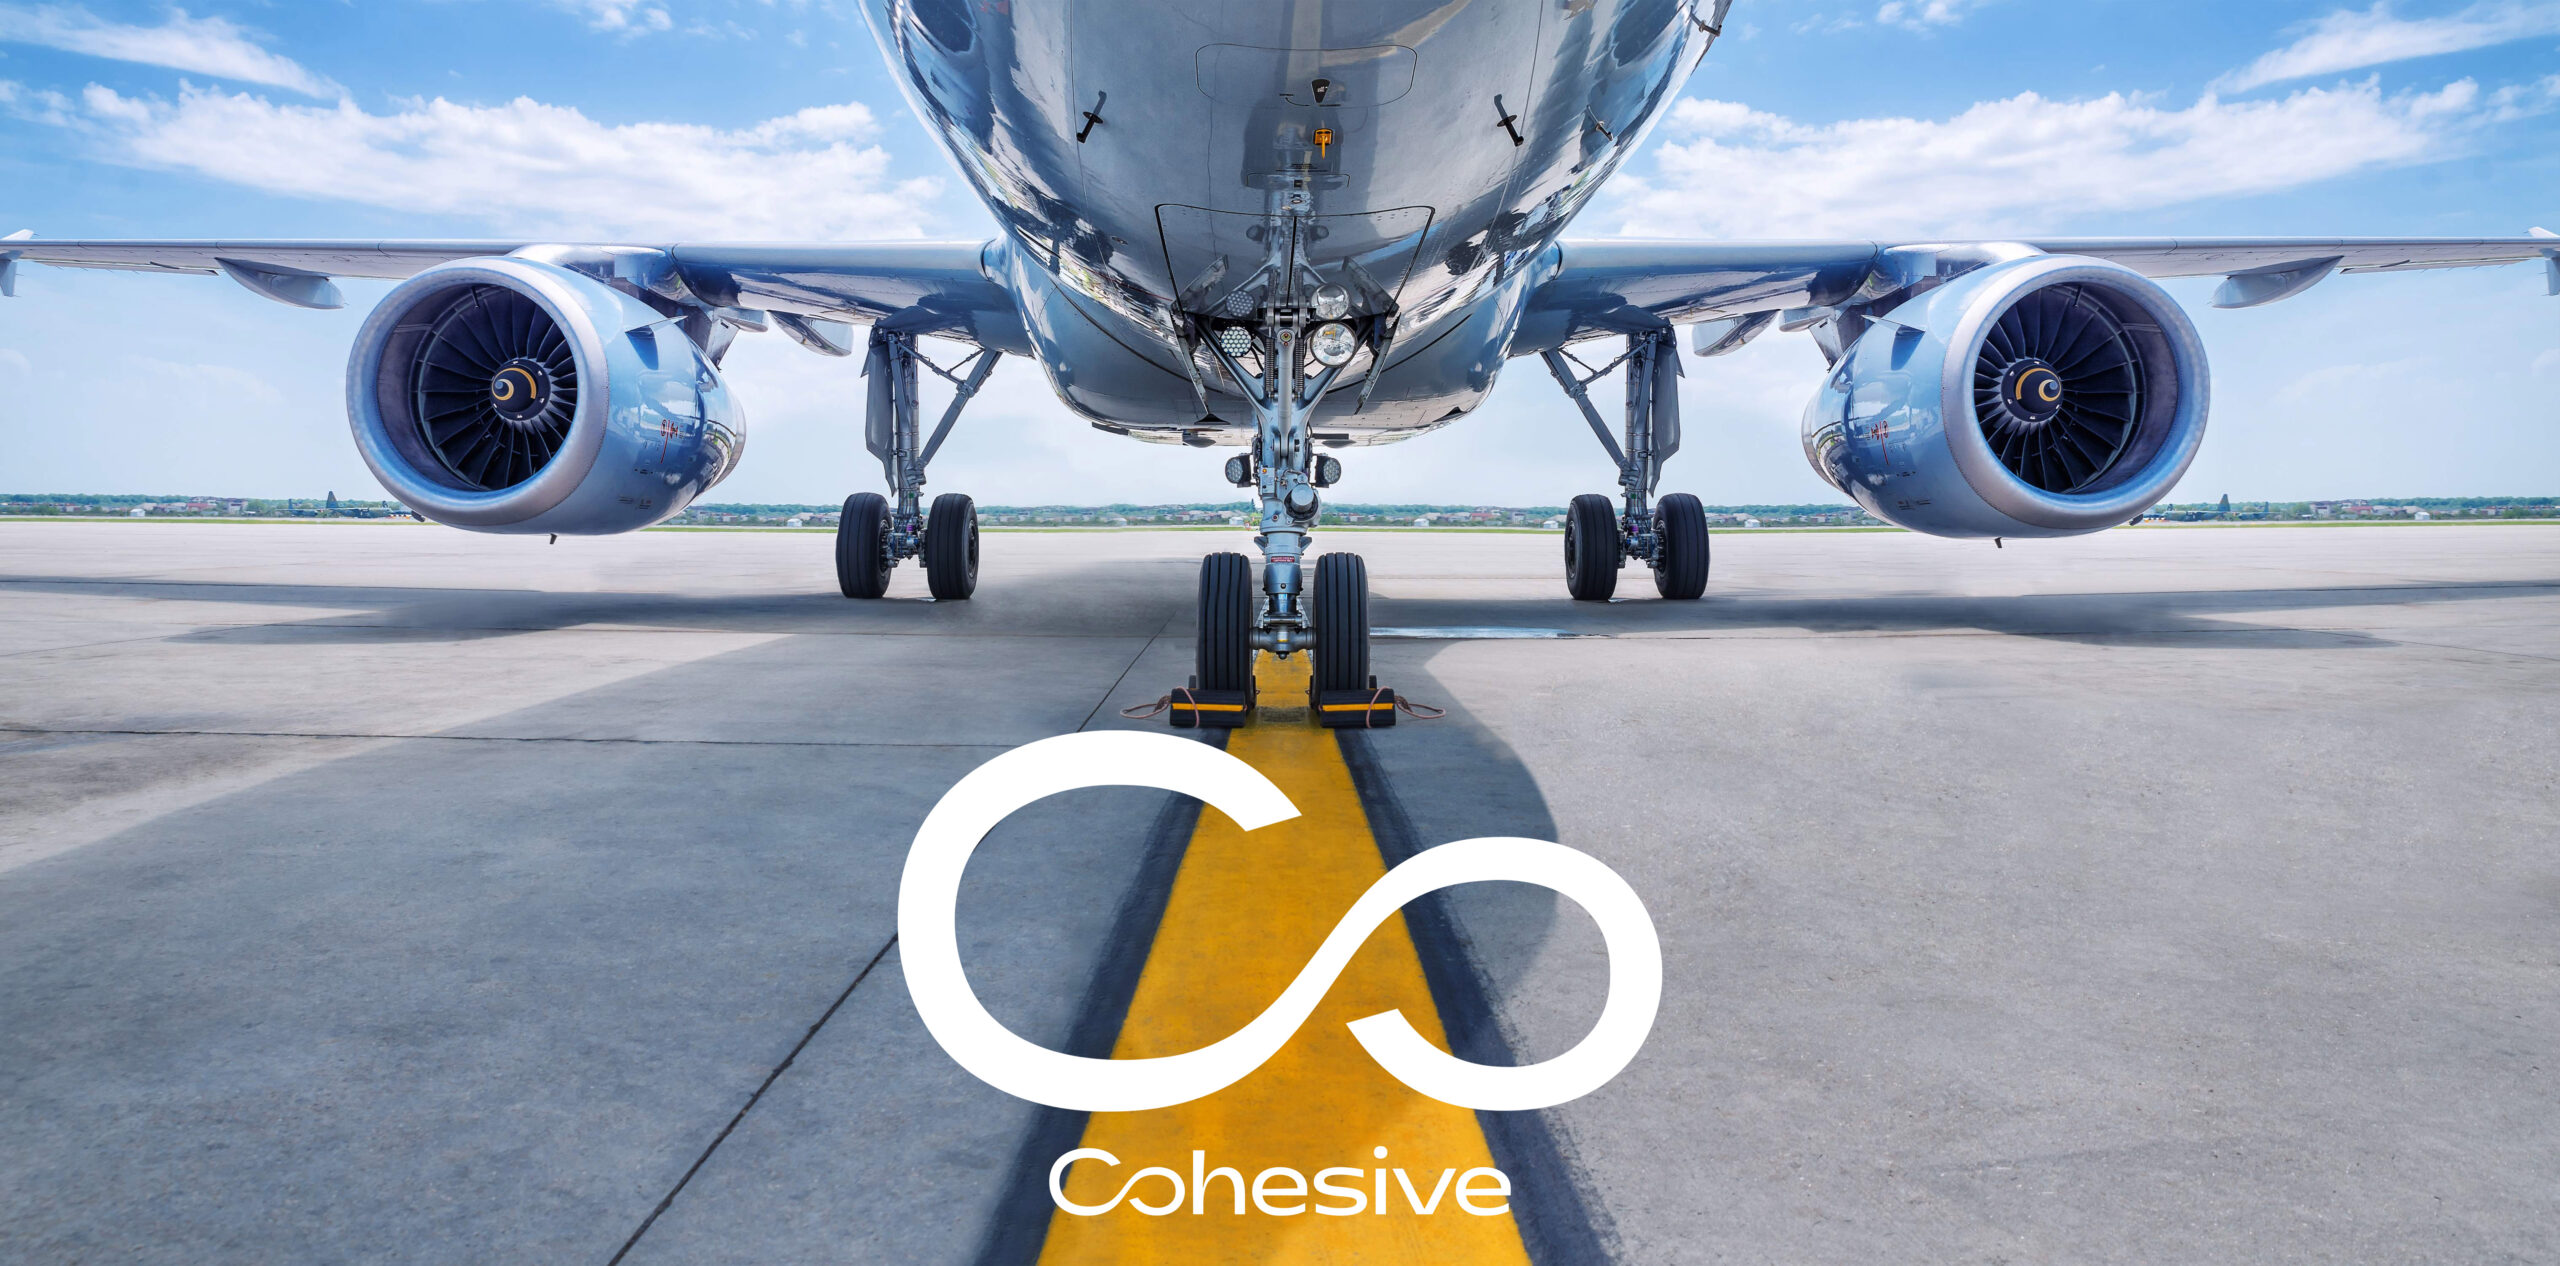 Cohesive providing full asset lifecycle management for the aviation industry